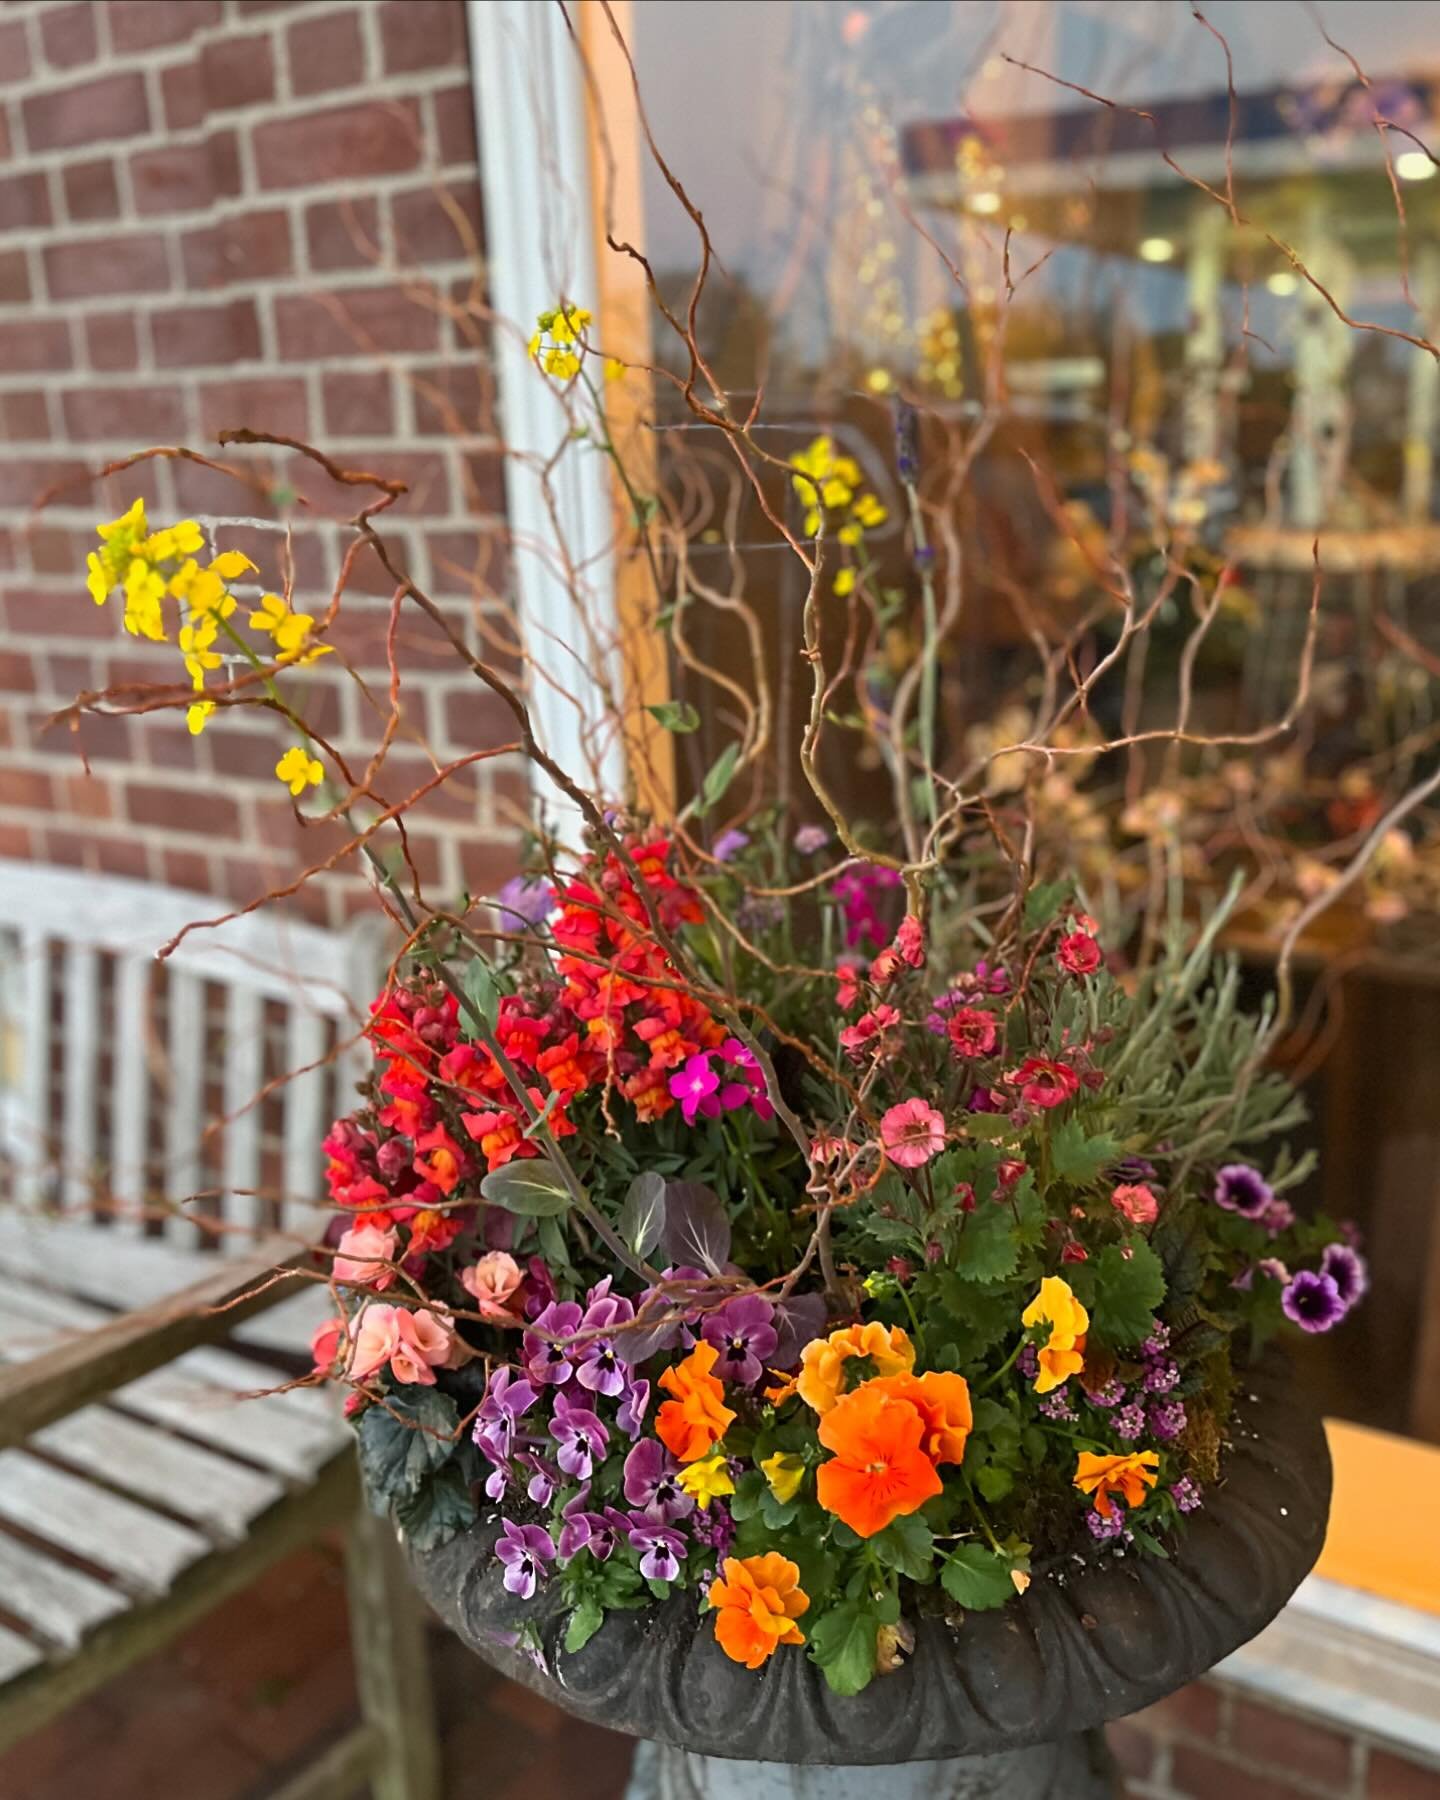 Summer is on the horizon and we are loving our newly updated urns outside the shop ☺️ brightly colored pansies, petunias, geum, snapdragons, and a burgundy Pal Choi even decided to show off an unexpected yellow bloom. 
 
If your Spring pots are feeli